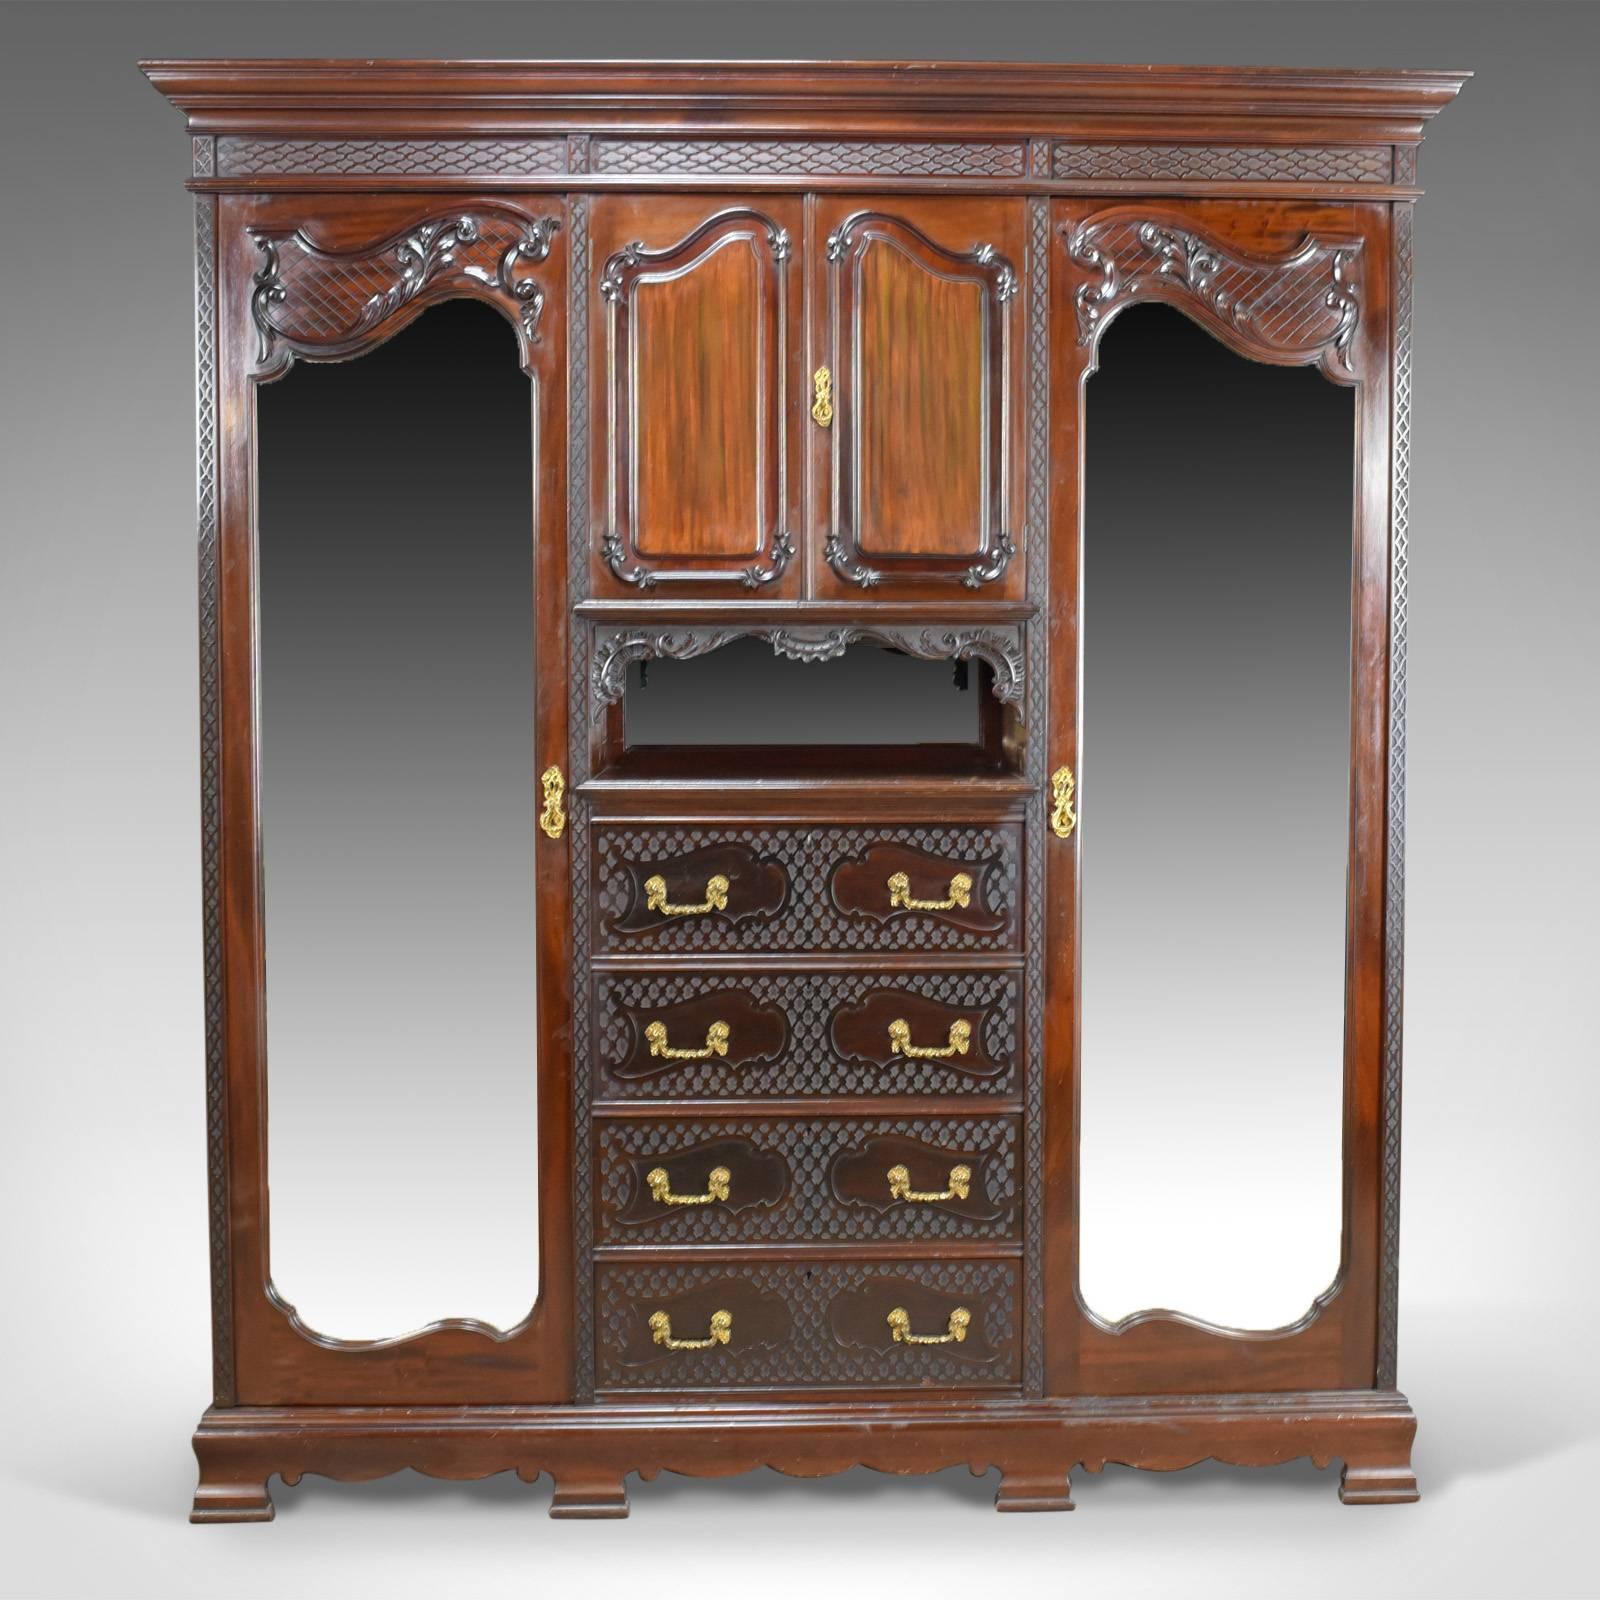 This is an antique wardrobe in carved mahogany, an English compactum dating to the Edwardian period, circa 1910.

Craftsmanship in a quality dark mahogany with a wax polished finish
Good consistent color throughout with a desirable aged